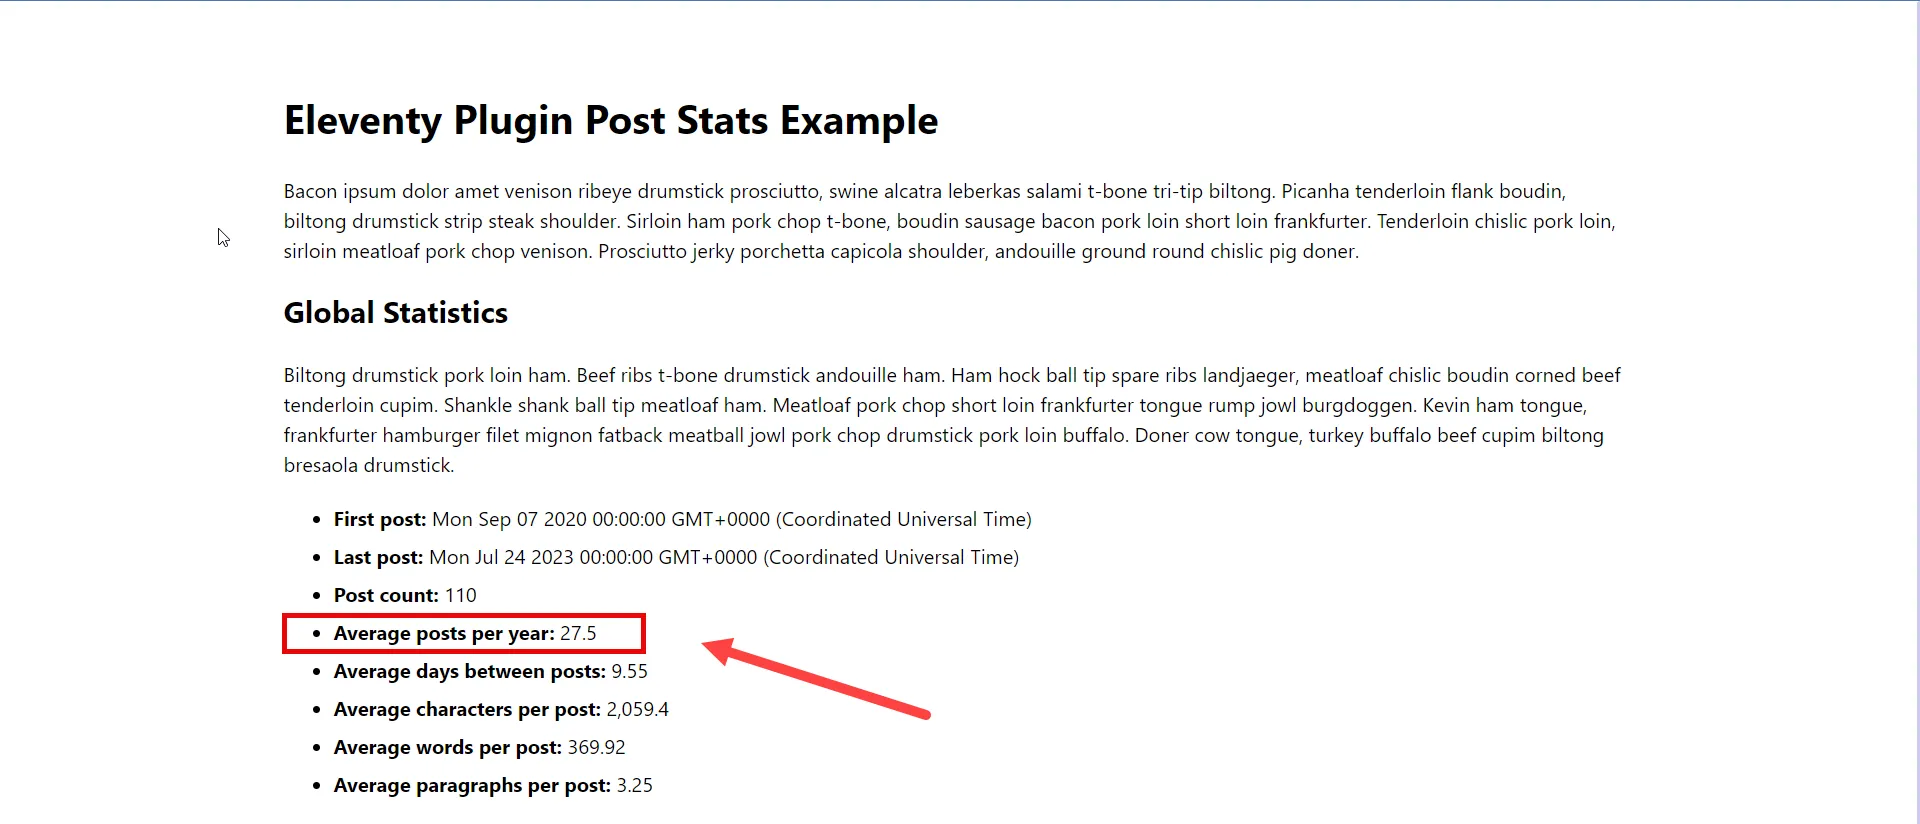 Shows the Average Posts per year metric on the sample page